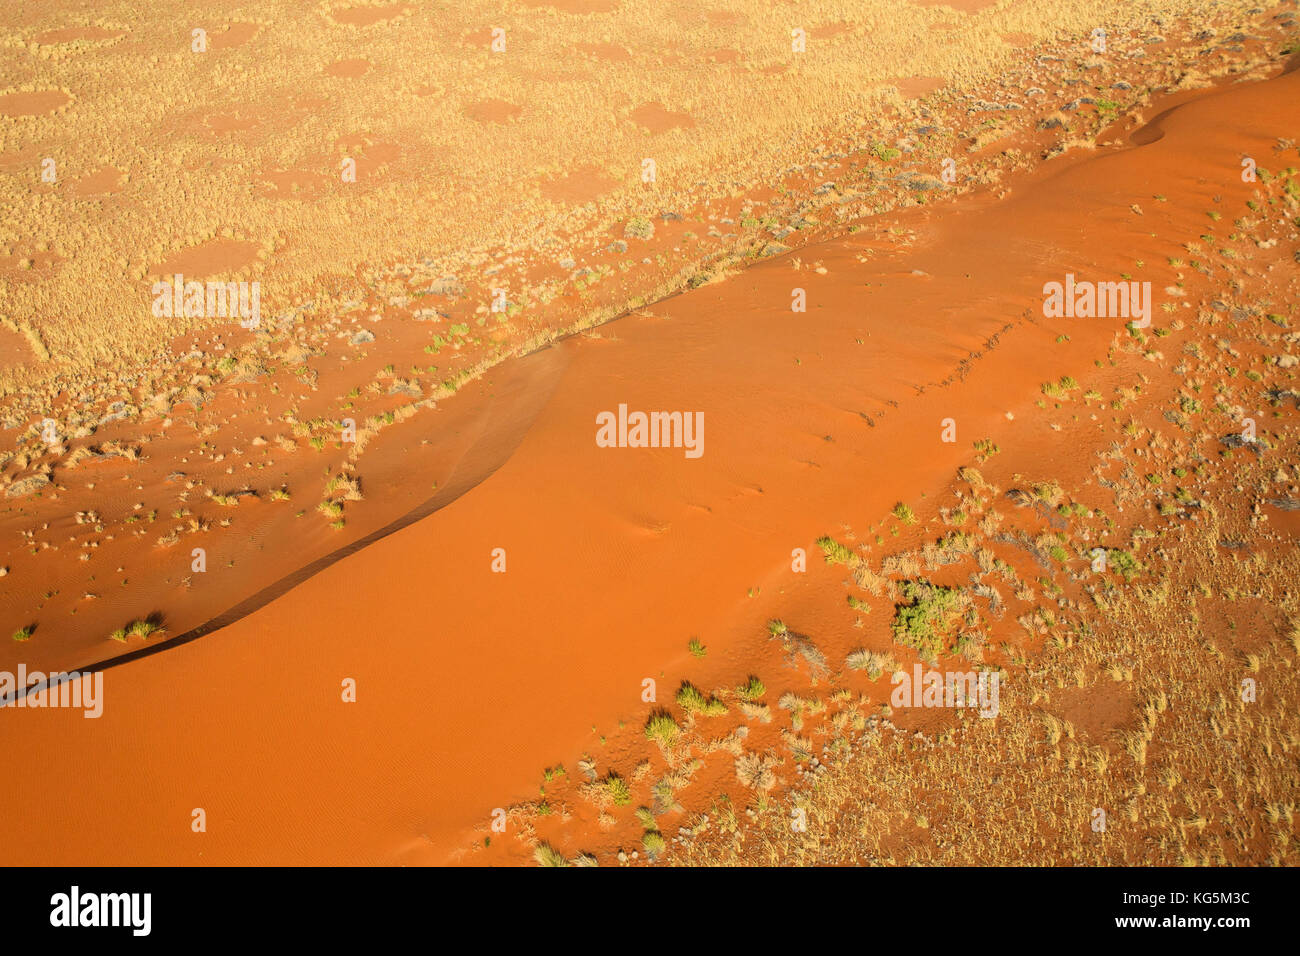 Aerial view of the typical red sand surrounded by plants in the dry landscape of Namib Desert Namibia Southern Africa Stock Photo